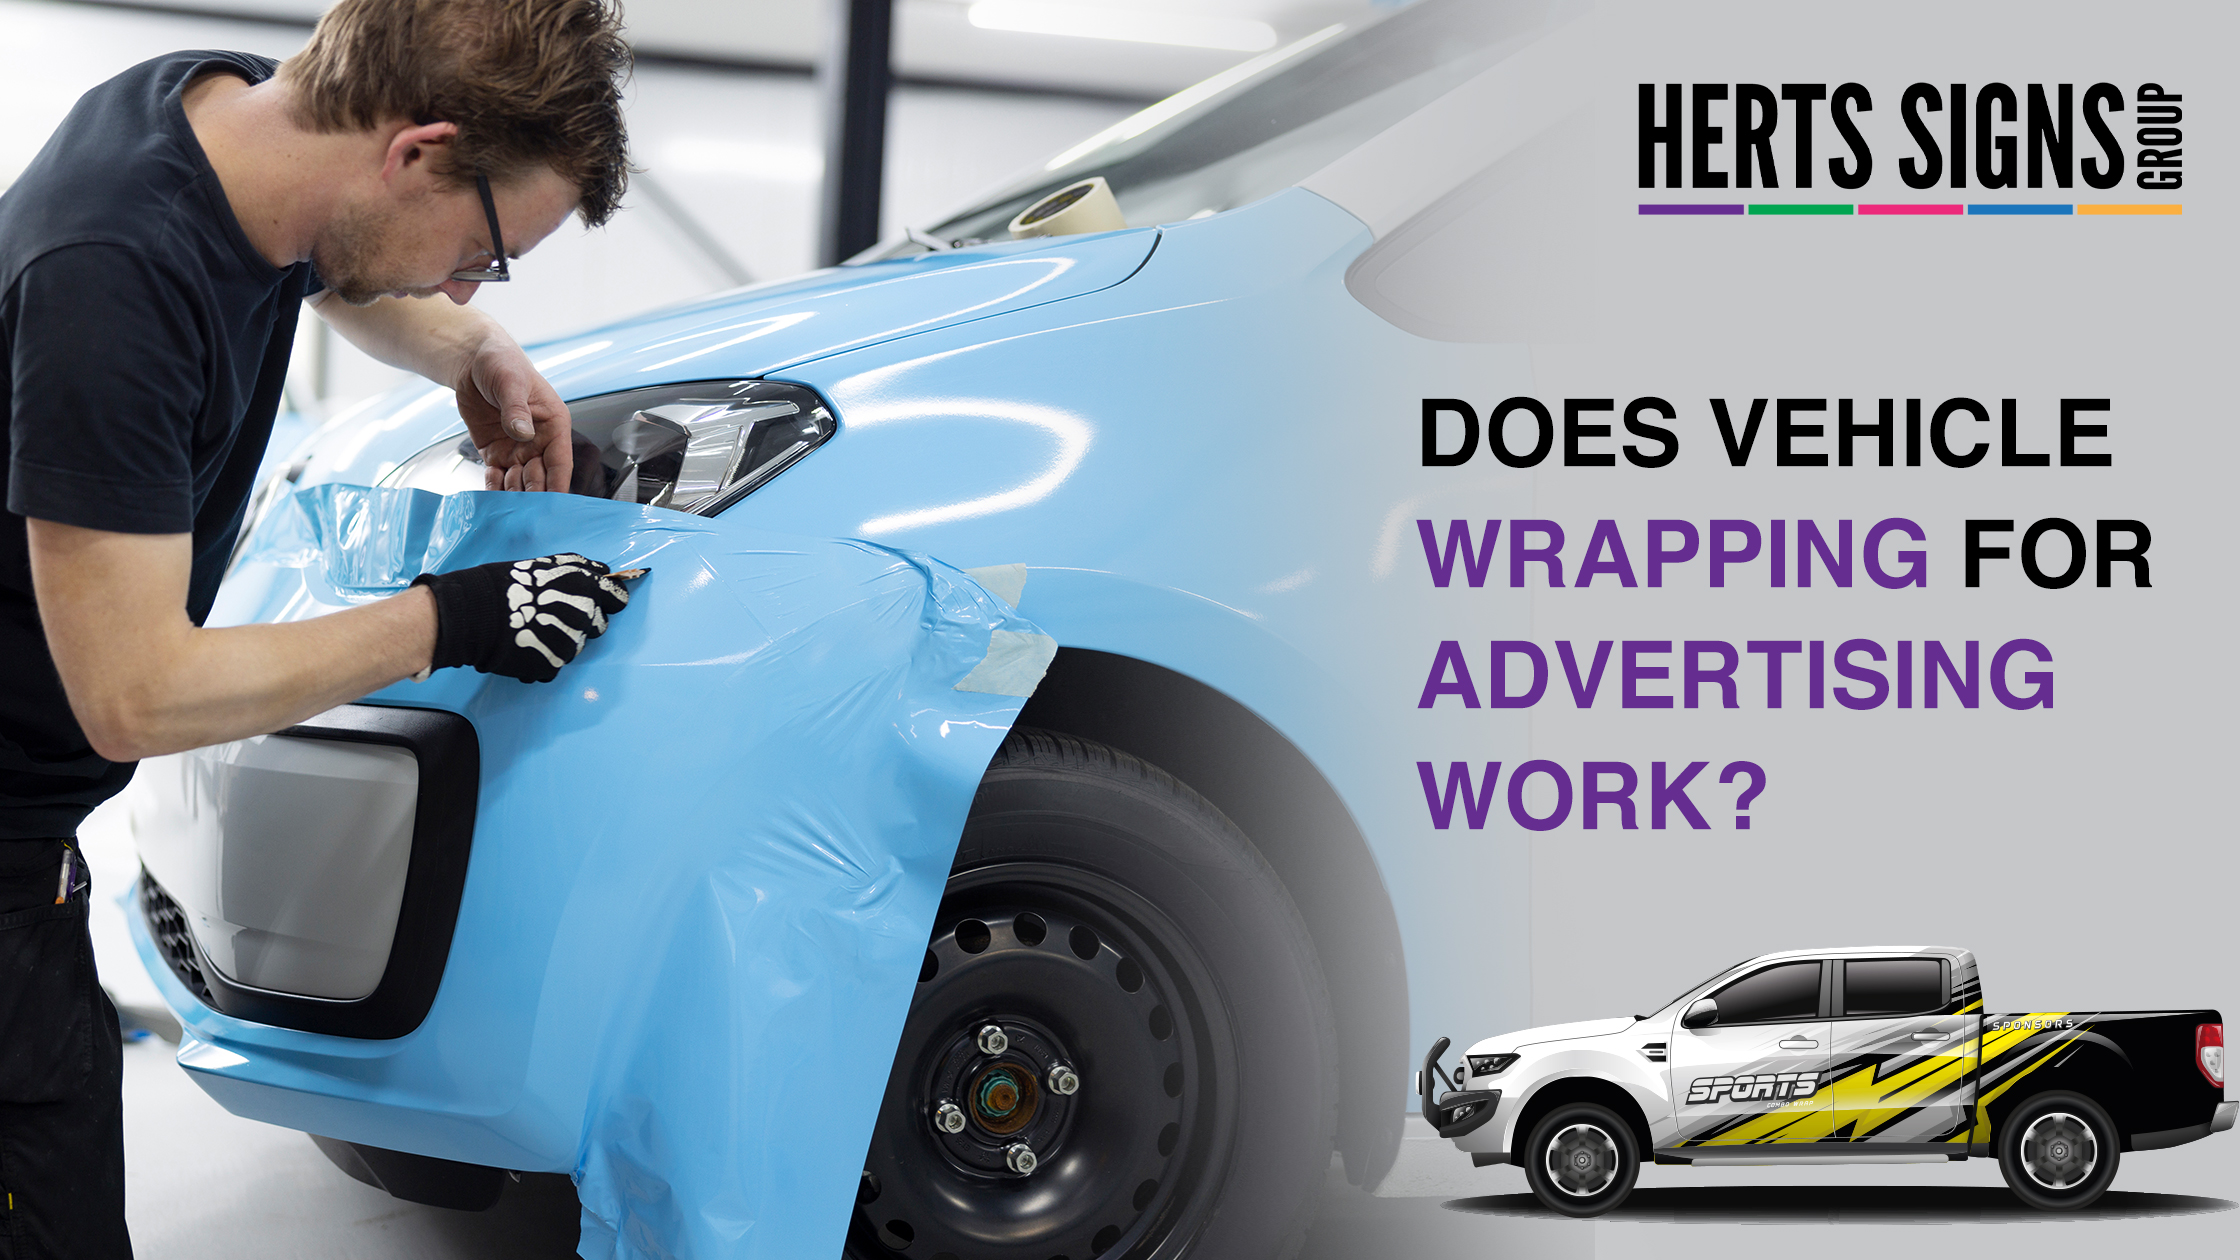 Does Vehicle Wrapping for Advertising Work? Herts Signs Weighs In